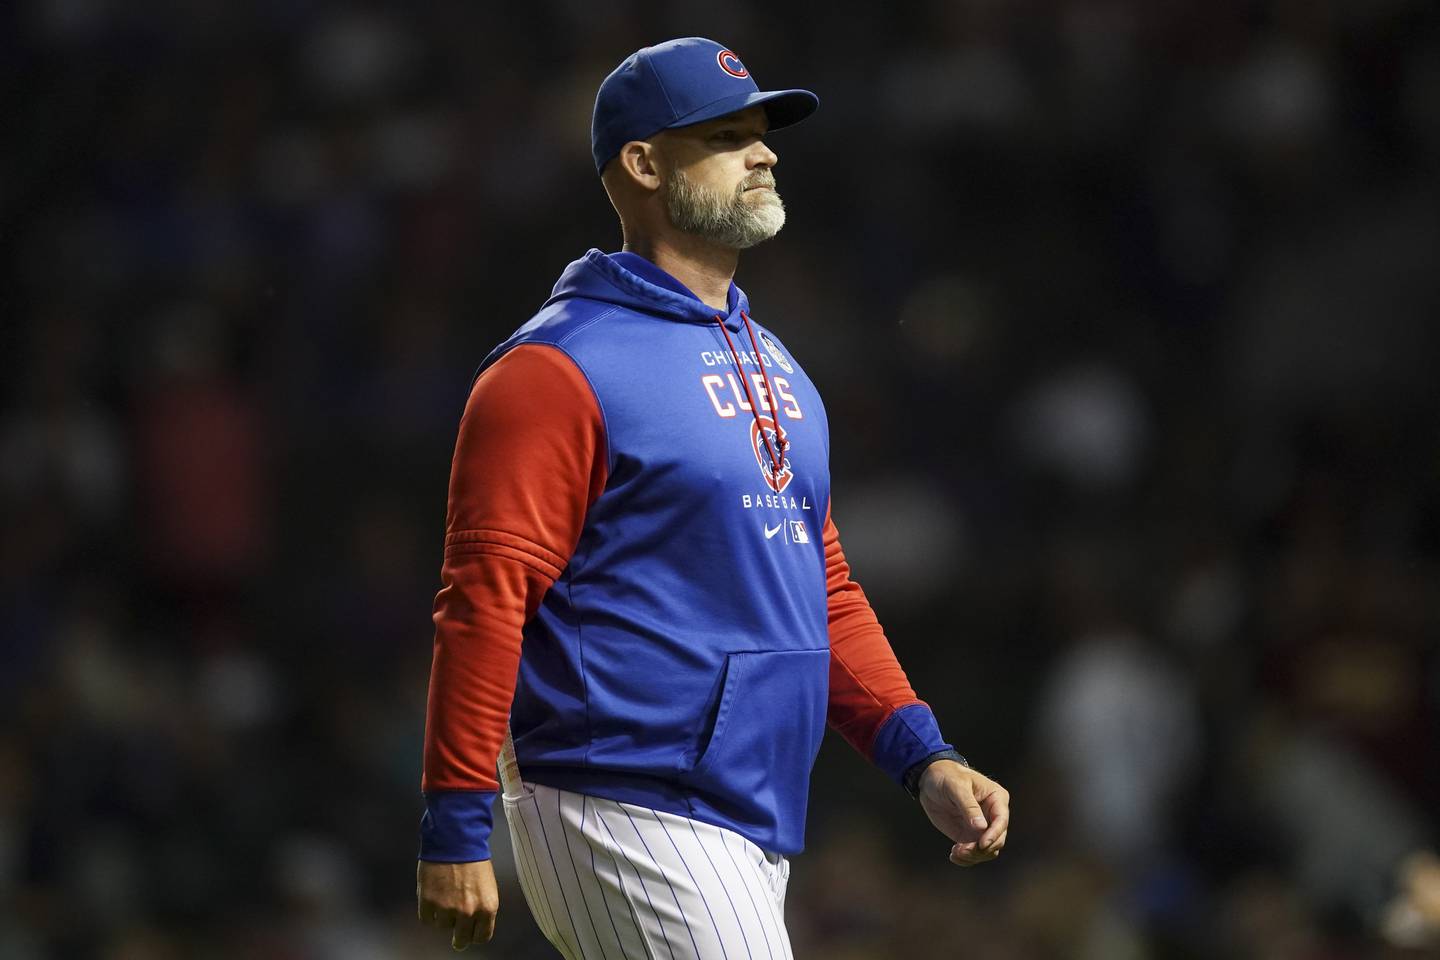 Cubs manager David Ross walks to the dugout during a game at Wrigley Field on June 2, 2022.